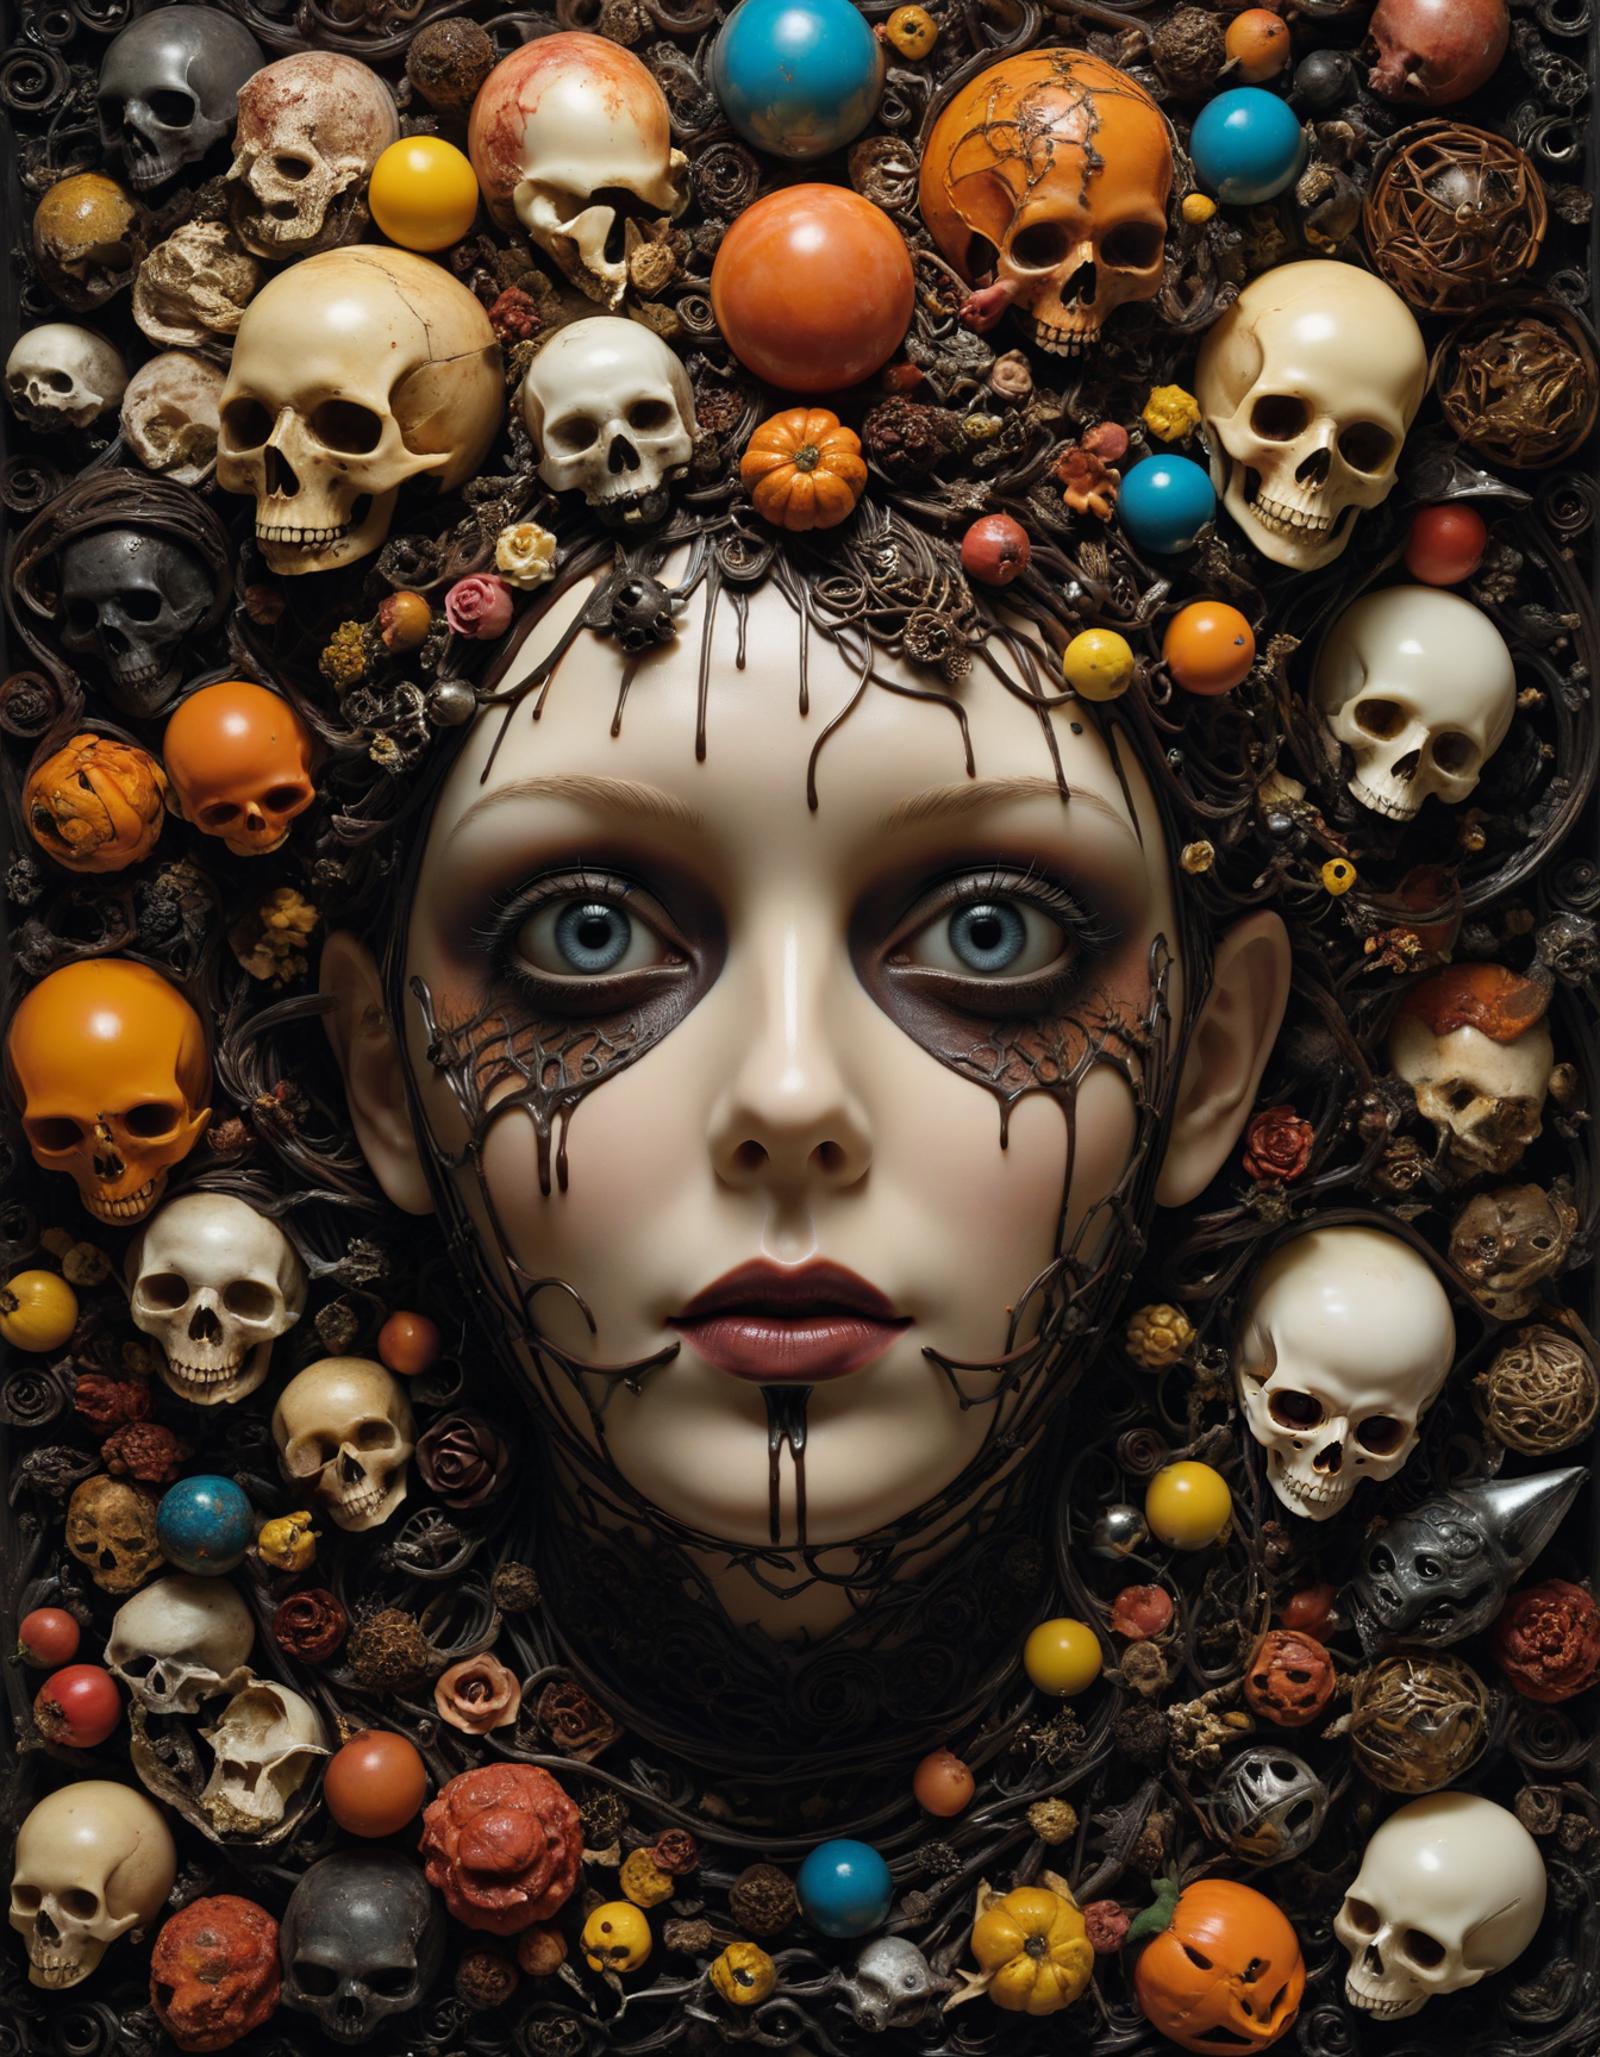 Skulls and Bones Surround a Woman's Head in an Artistic Display